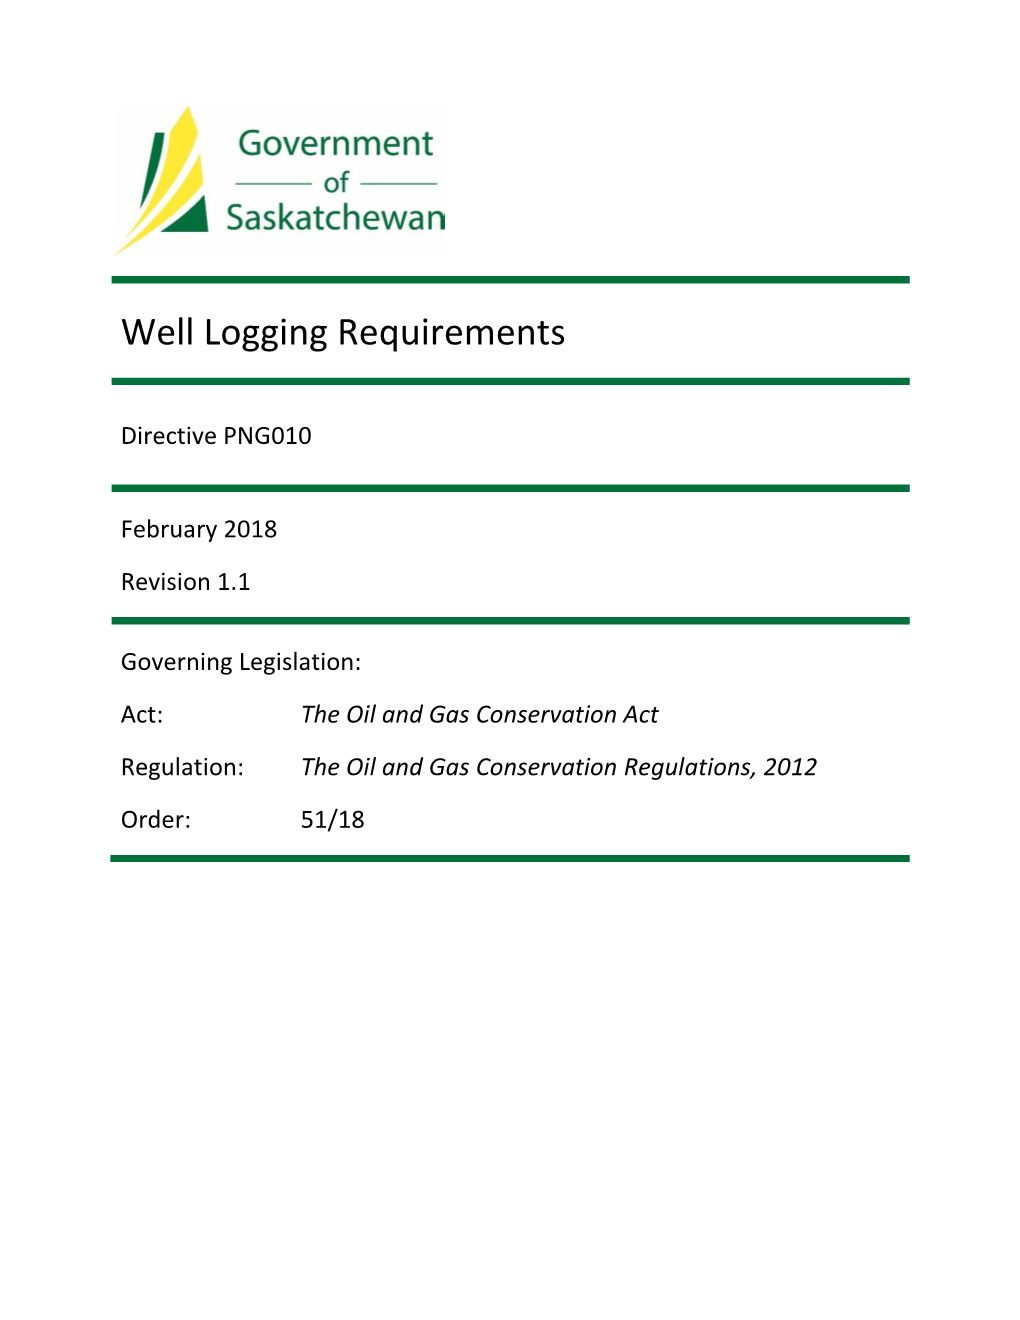 Well Logging Requirements